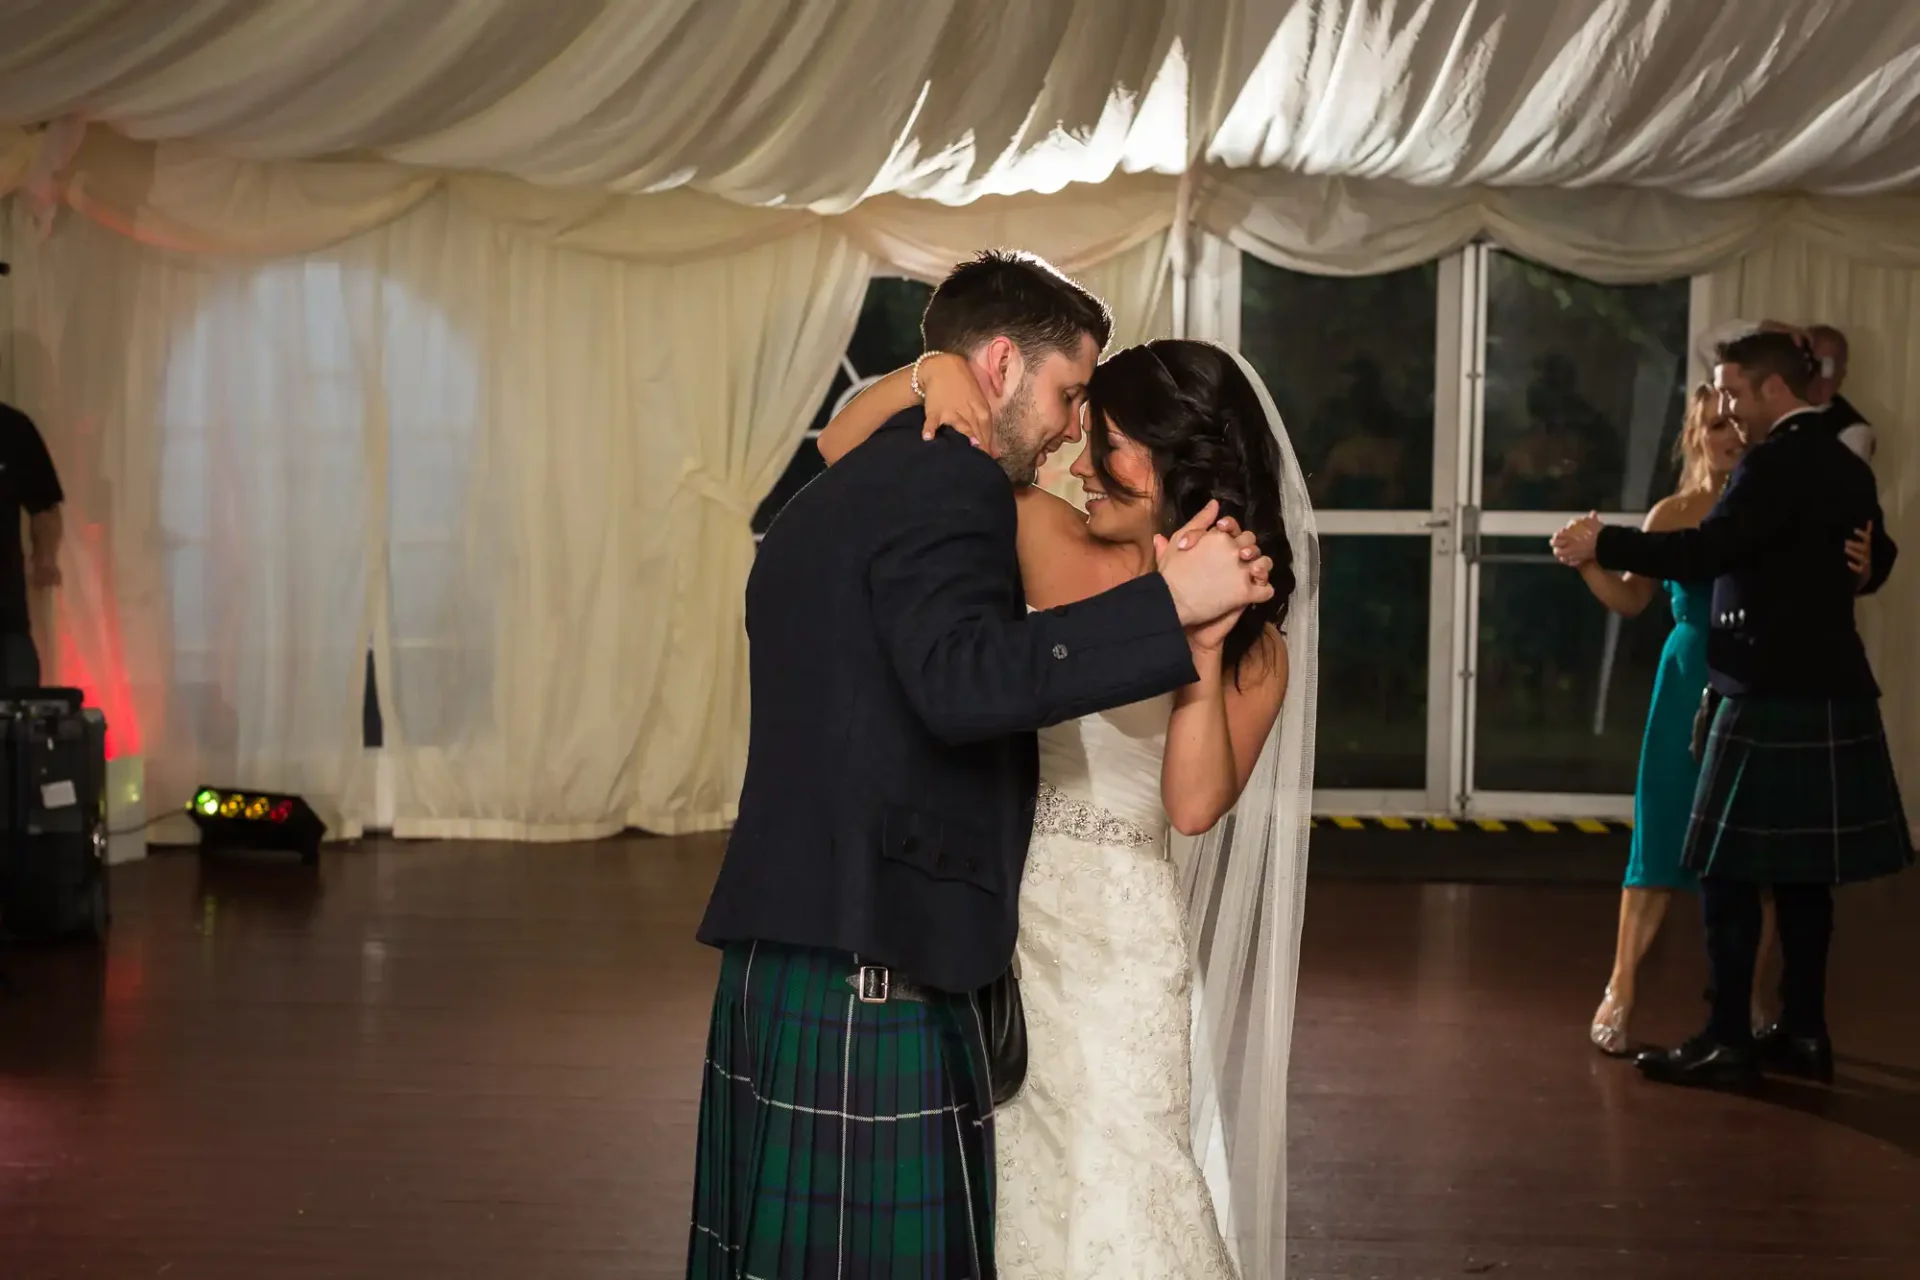 Bride and groom share a close dance at their wedding reception, with guests dancing in the background under a tented venue. the groom is wearing a kilt.